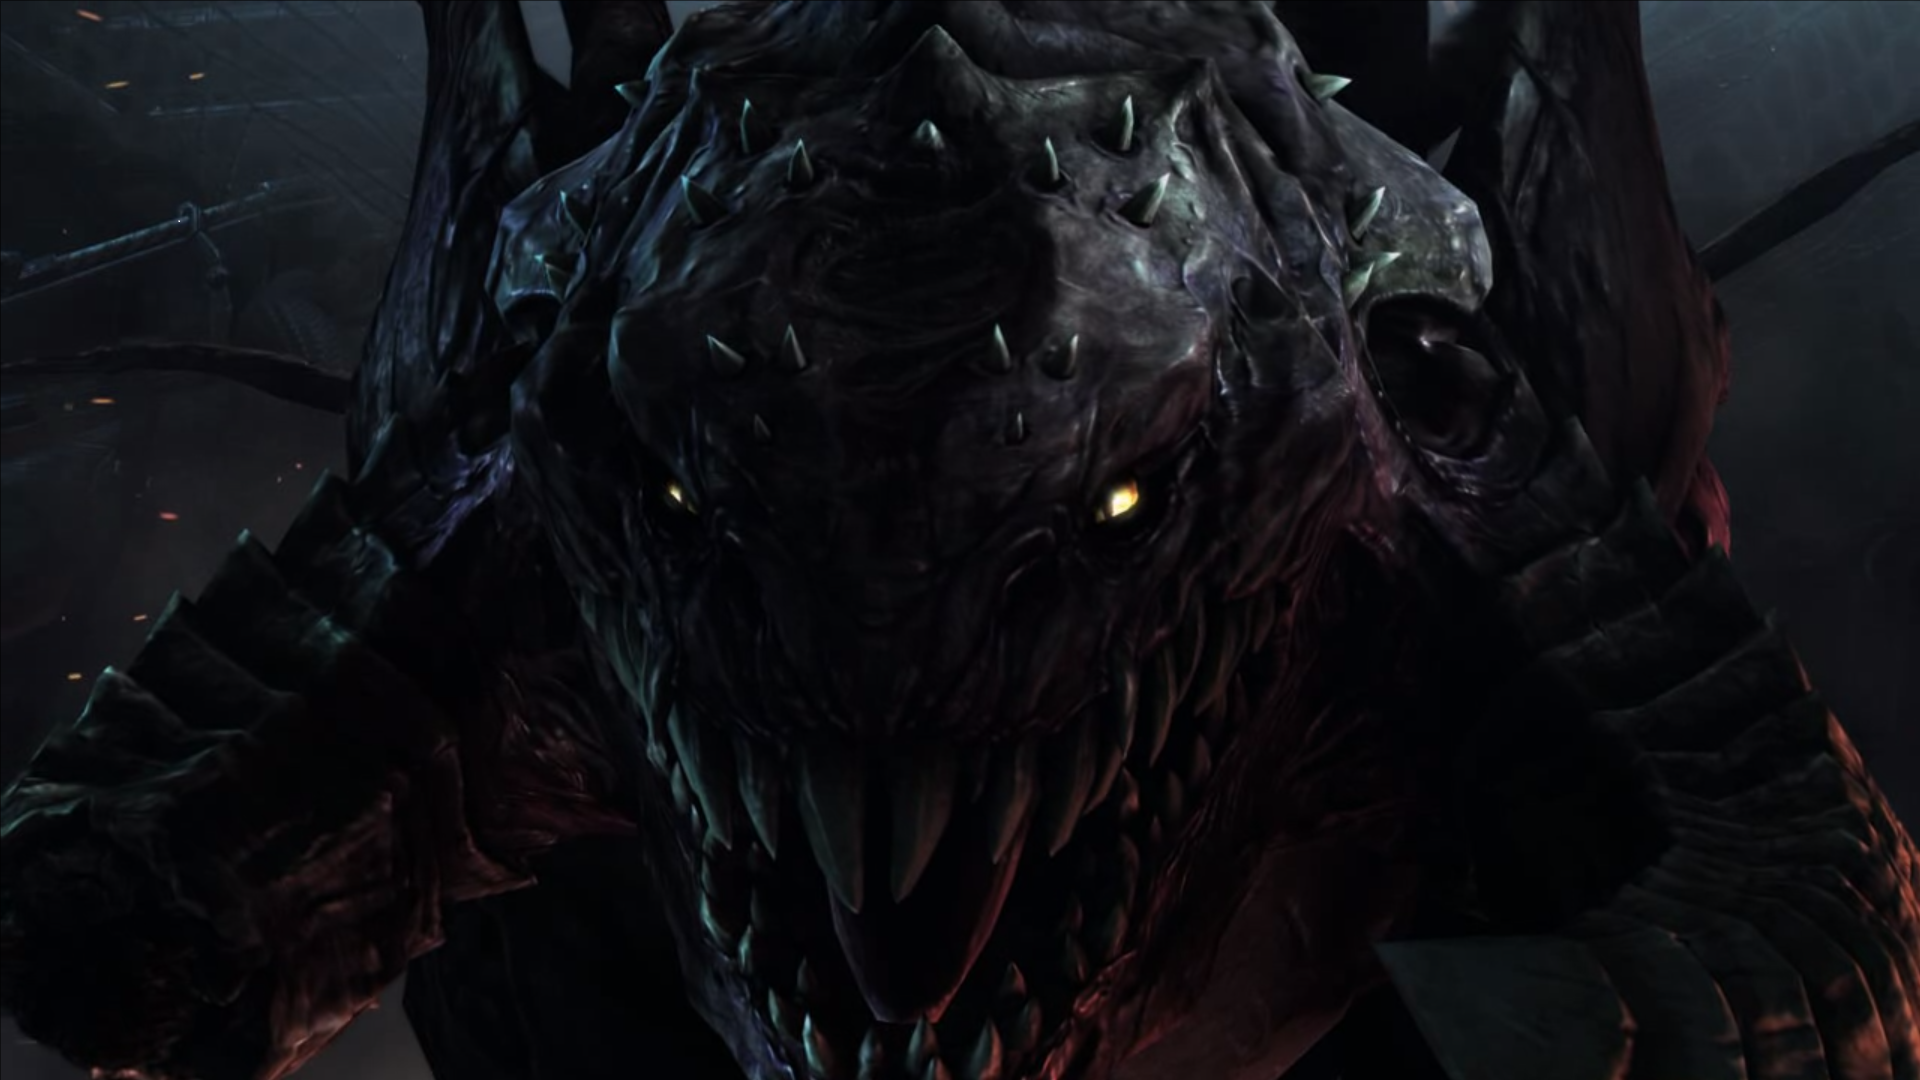 General 1920x1080 Zerg Starcraft II video games PC gaming science fiction glowing eyes creature